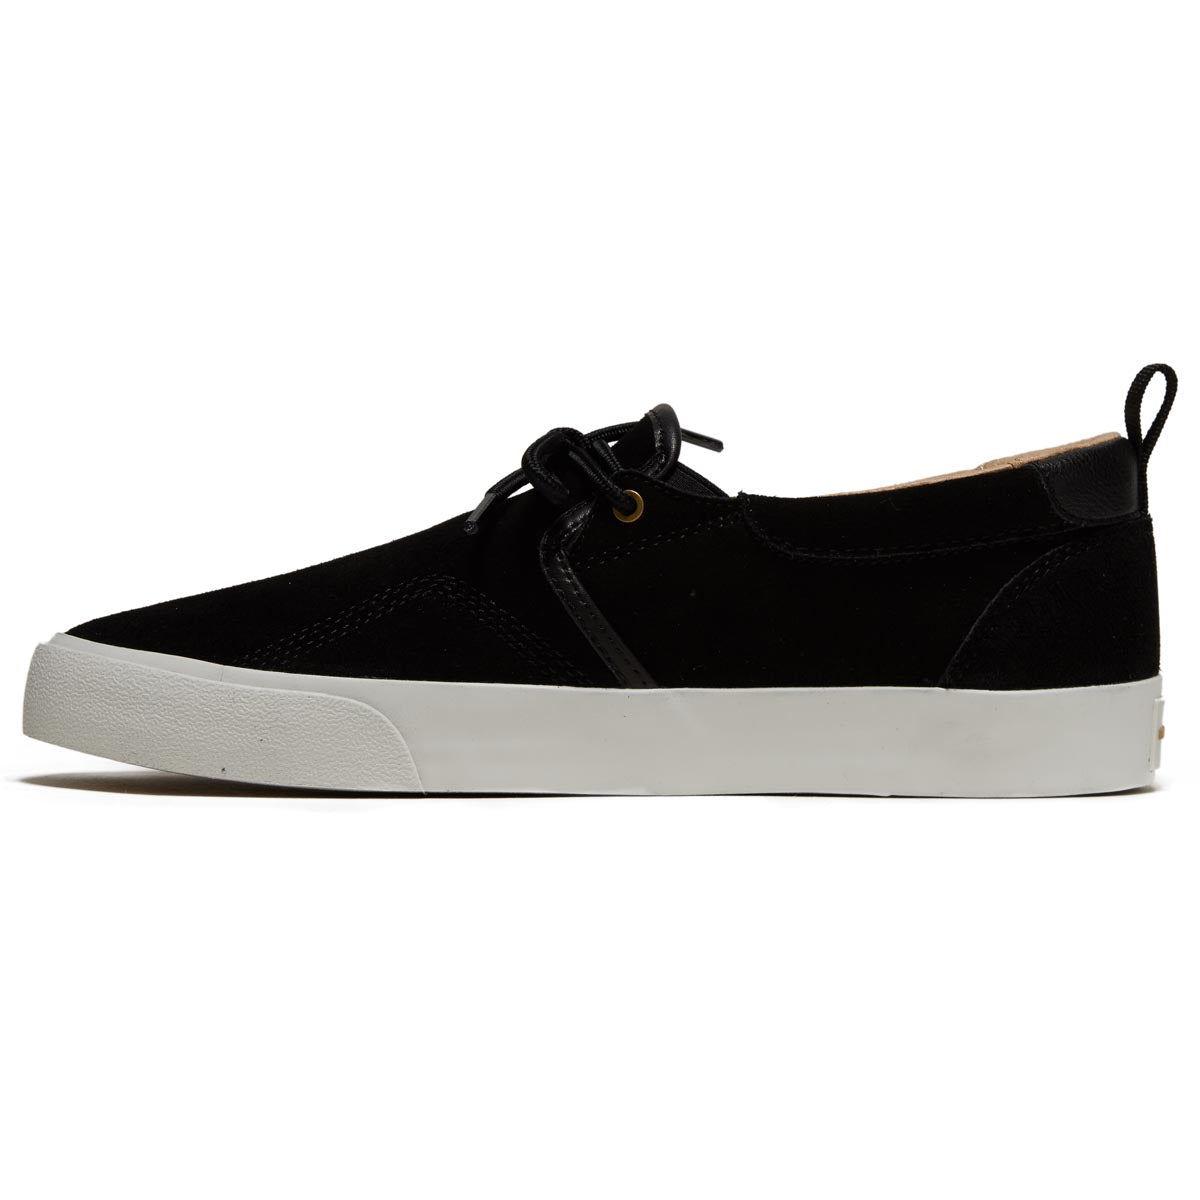 Hours Is Yours Callio S77 Shoes - Black/Off White image 2